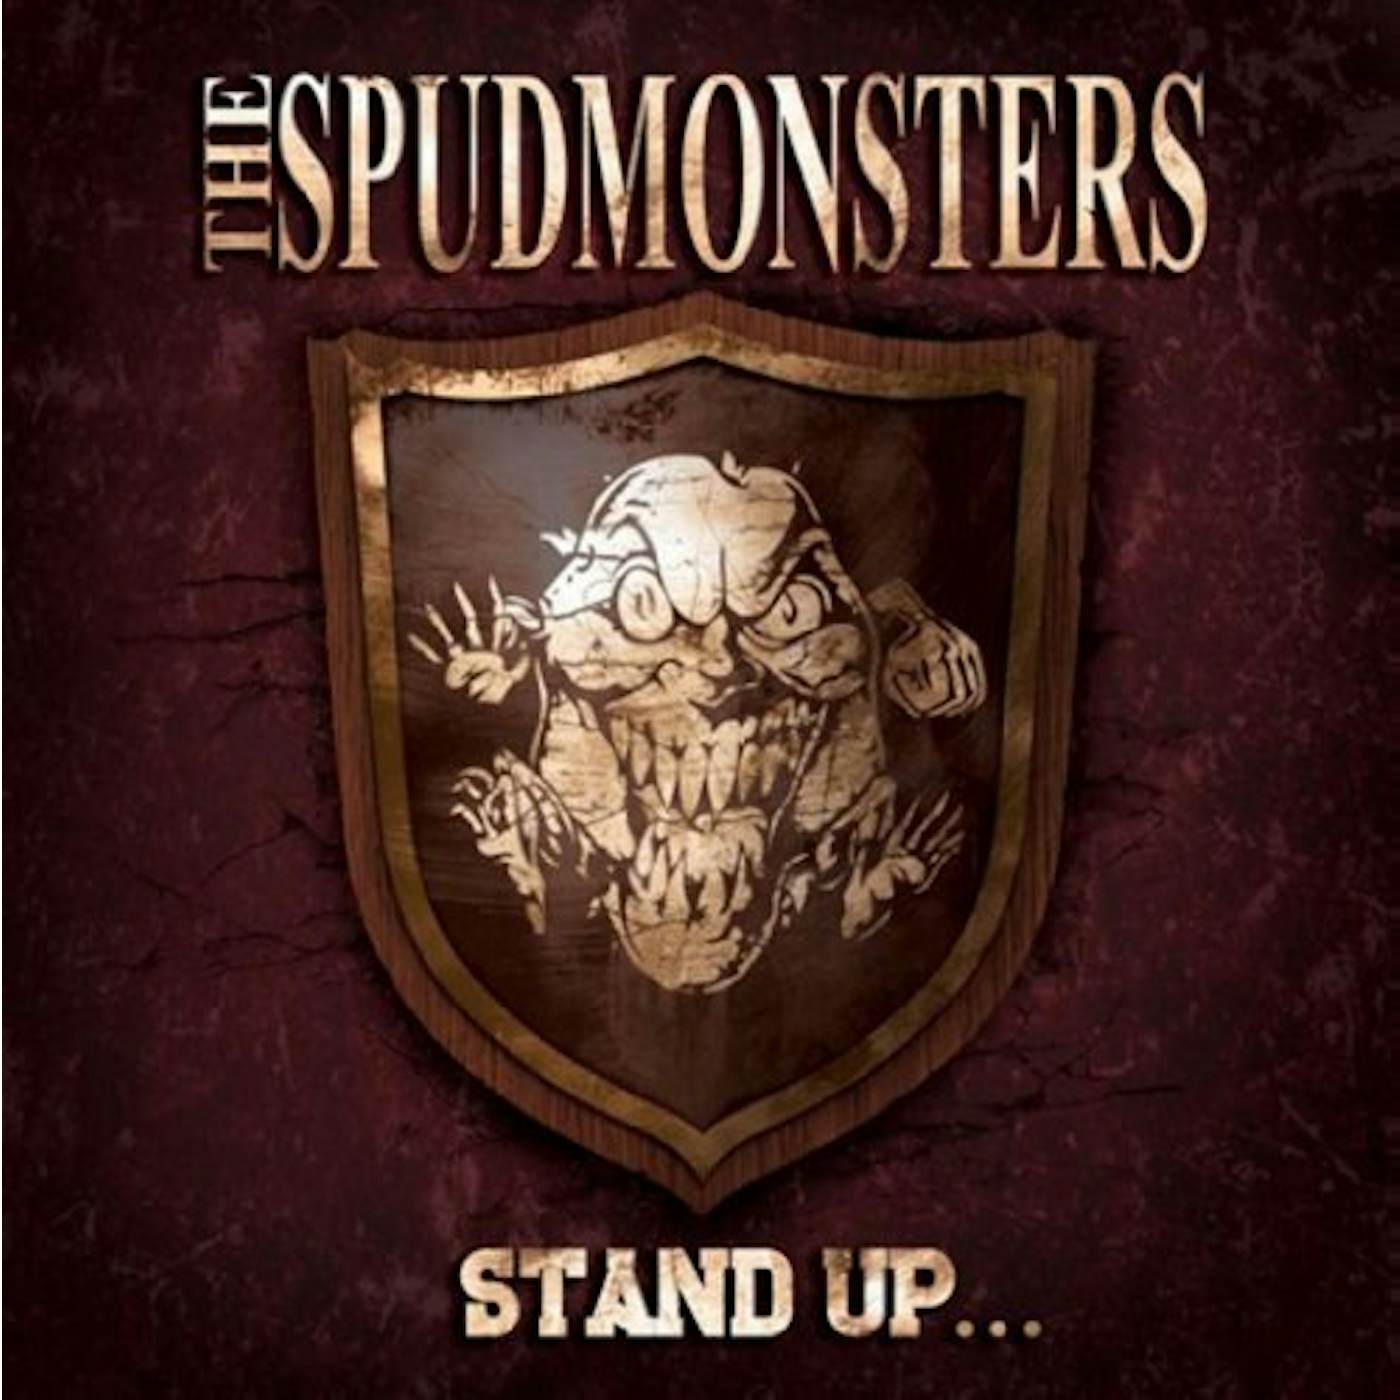 The Spudmonsters STAND UP Vinyl Record